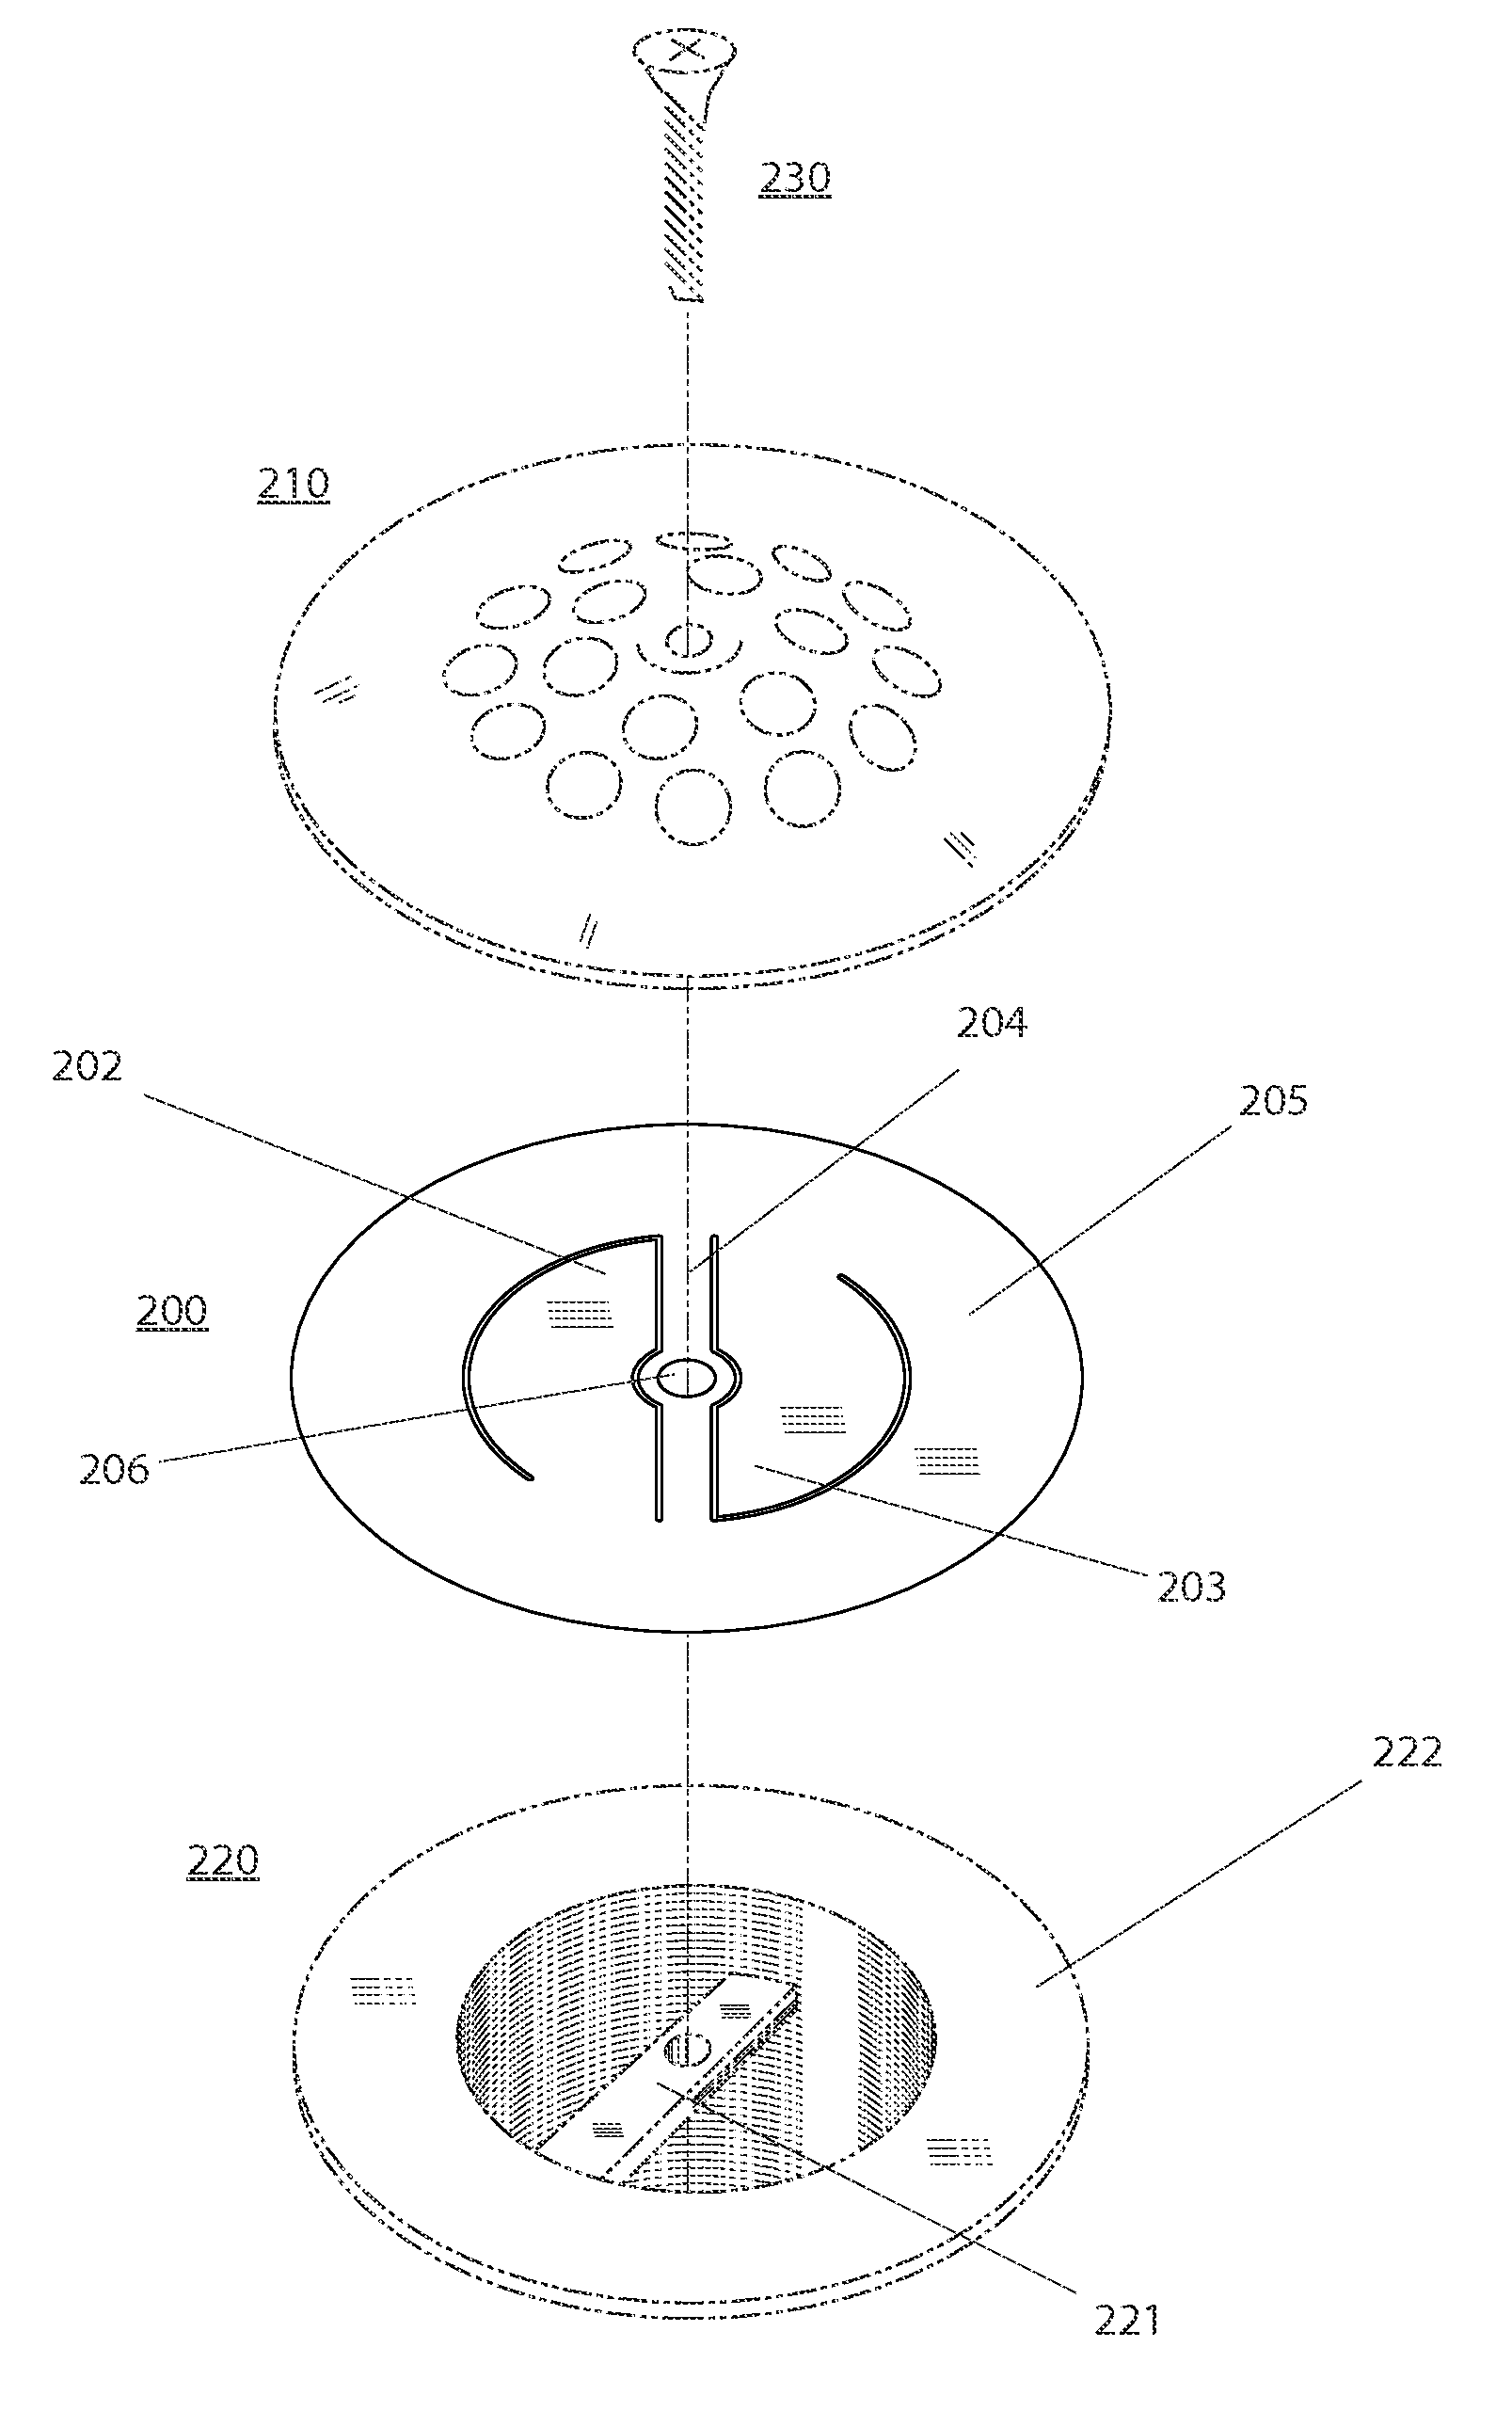 Gravity-assisted drain valve for restricting intake of mildew spores